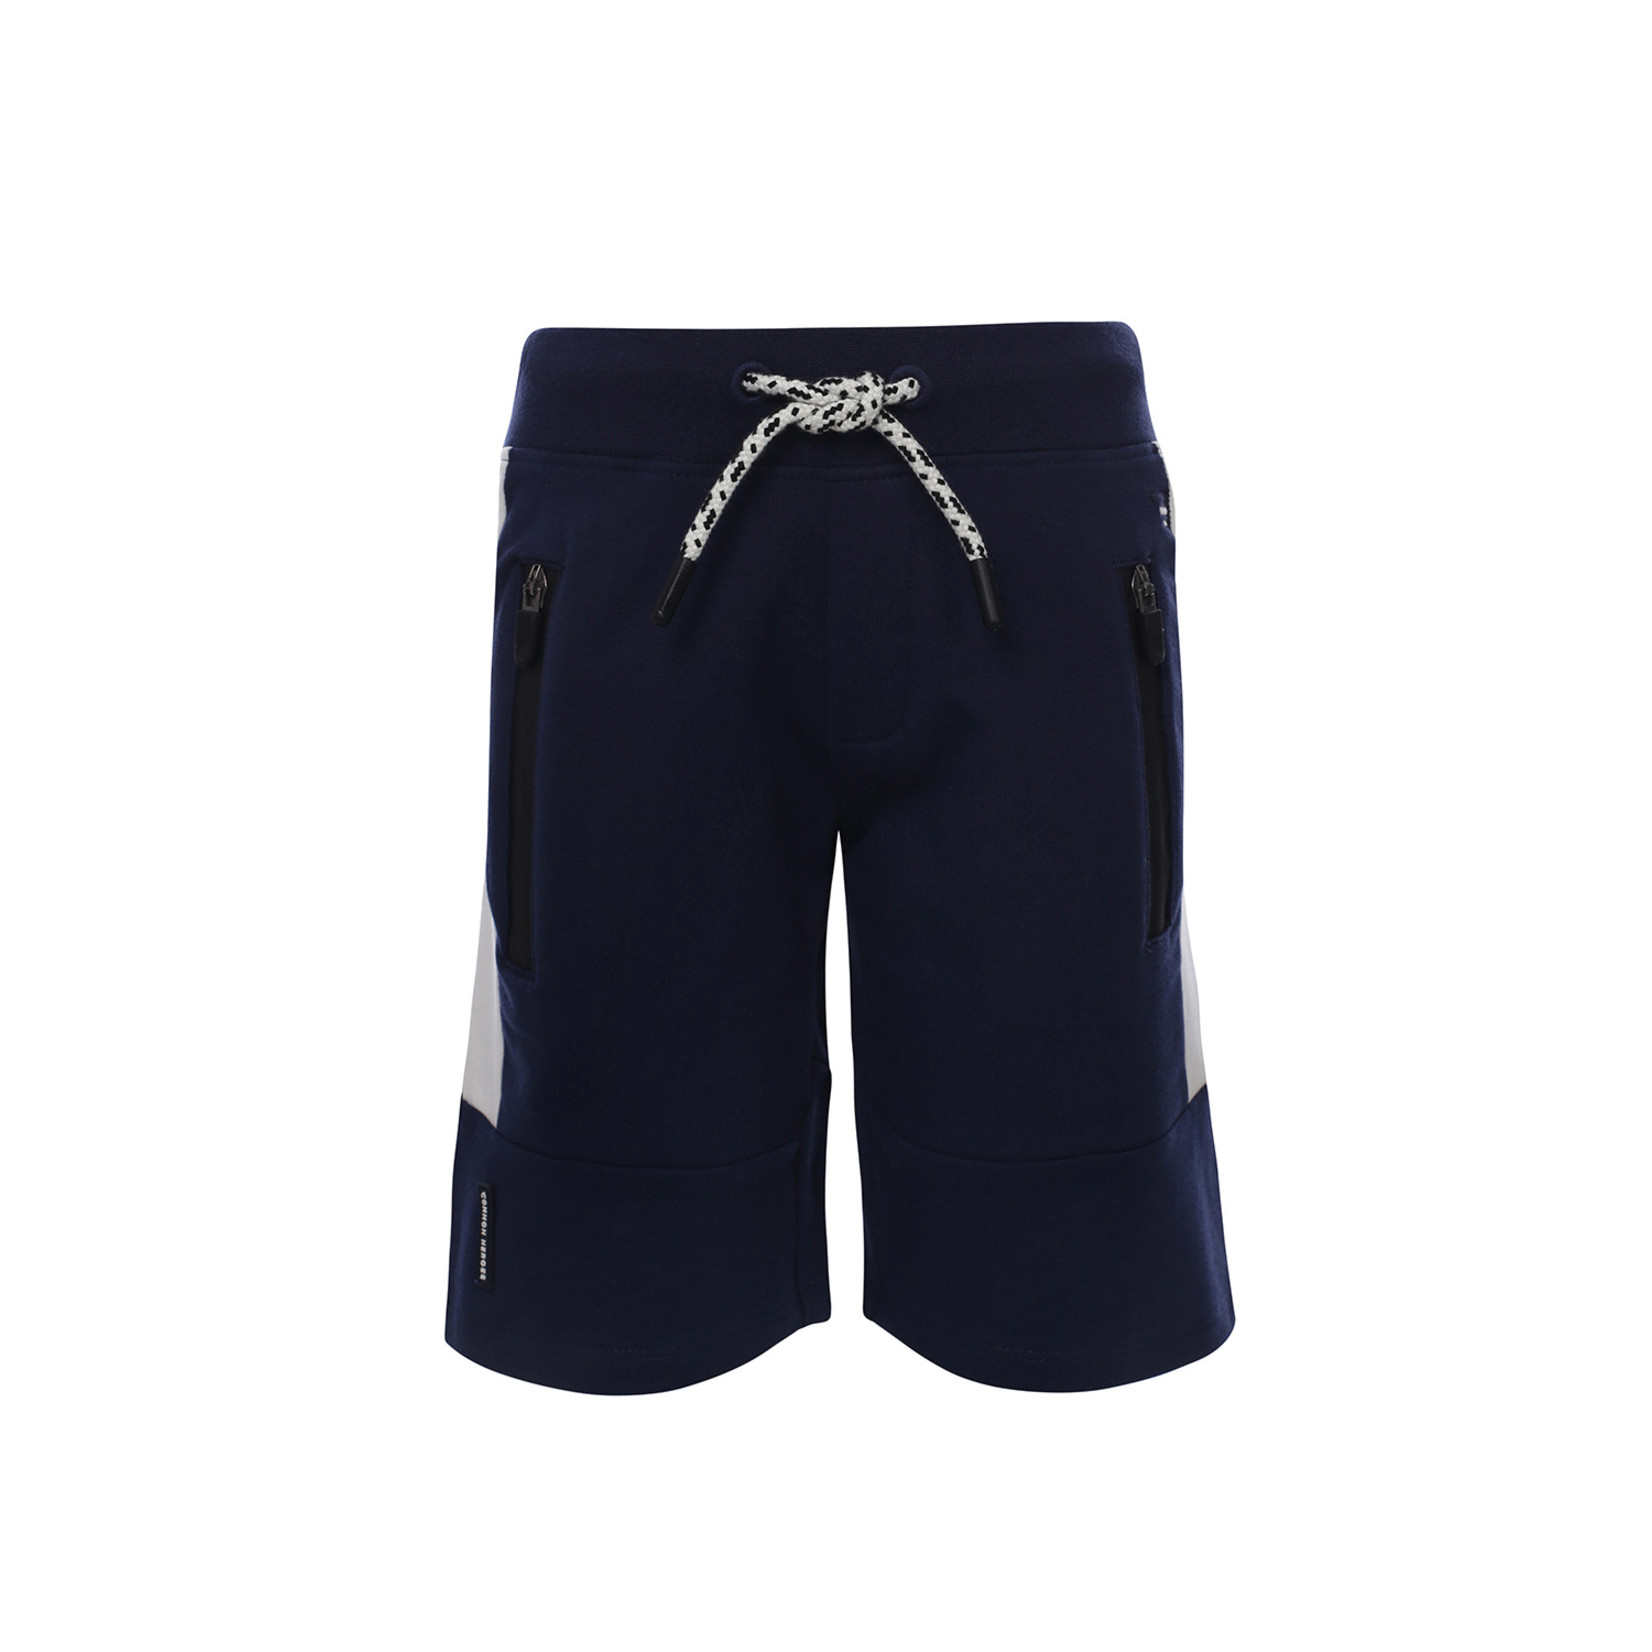 Common Heroes Common Heroes sweat shorts Blue